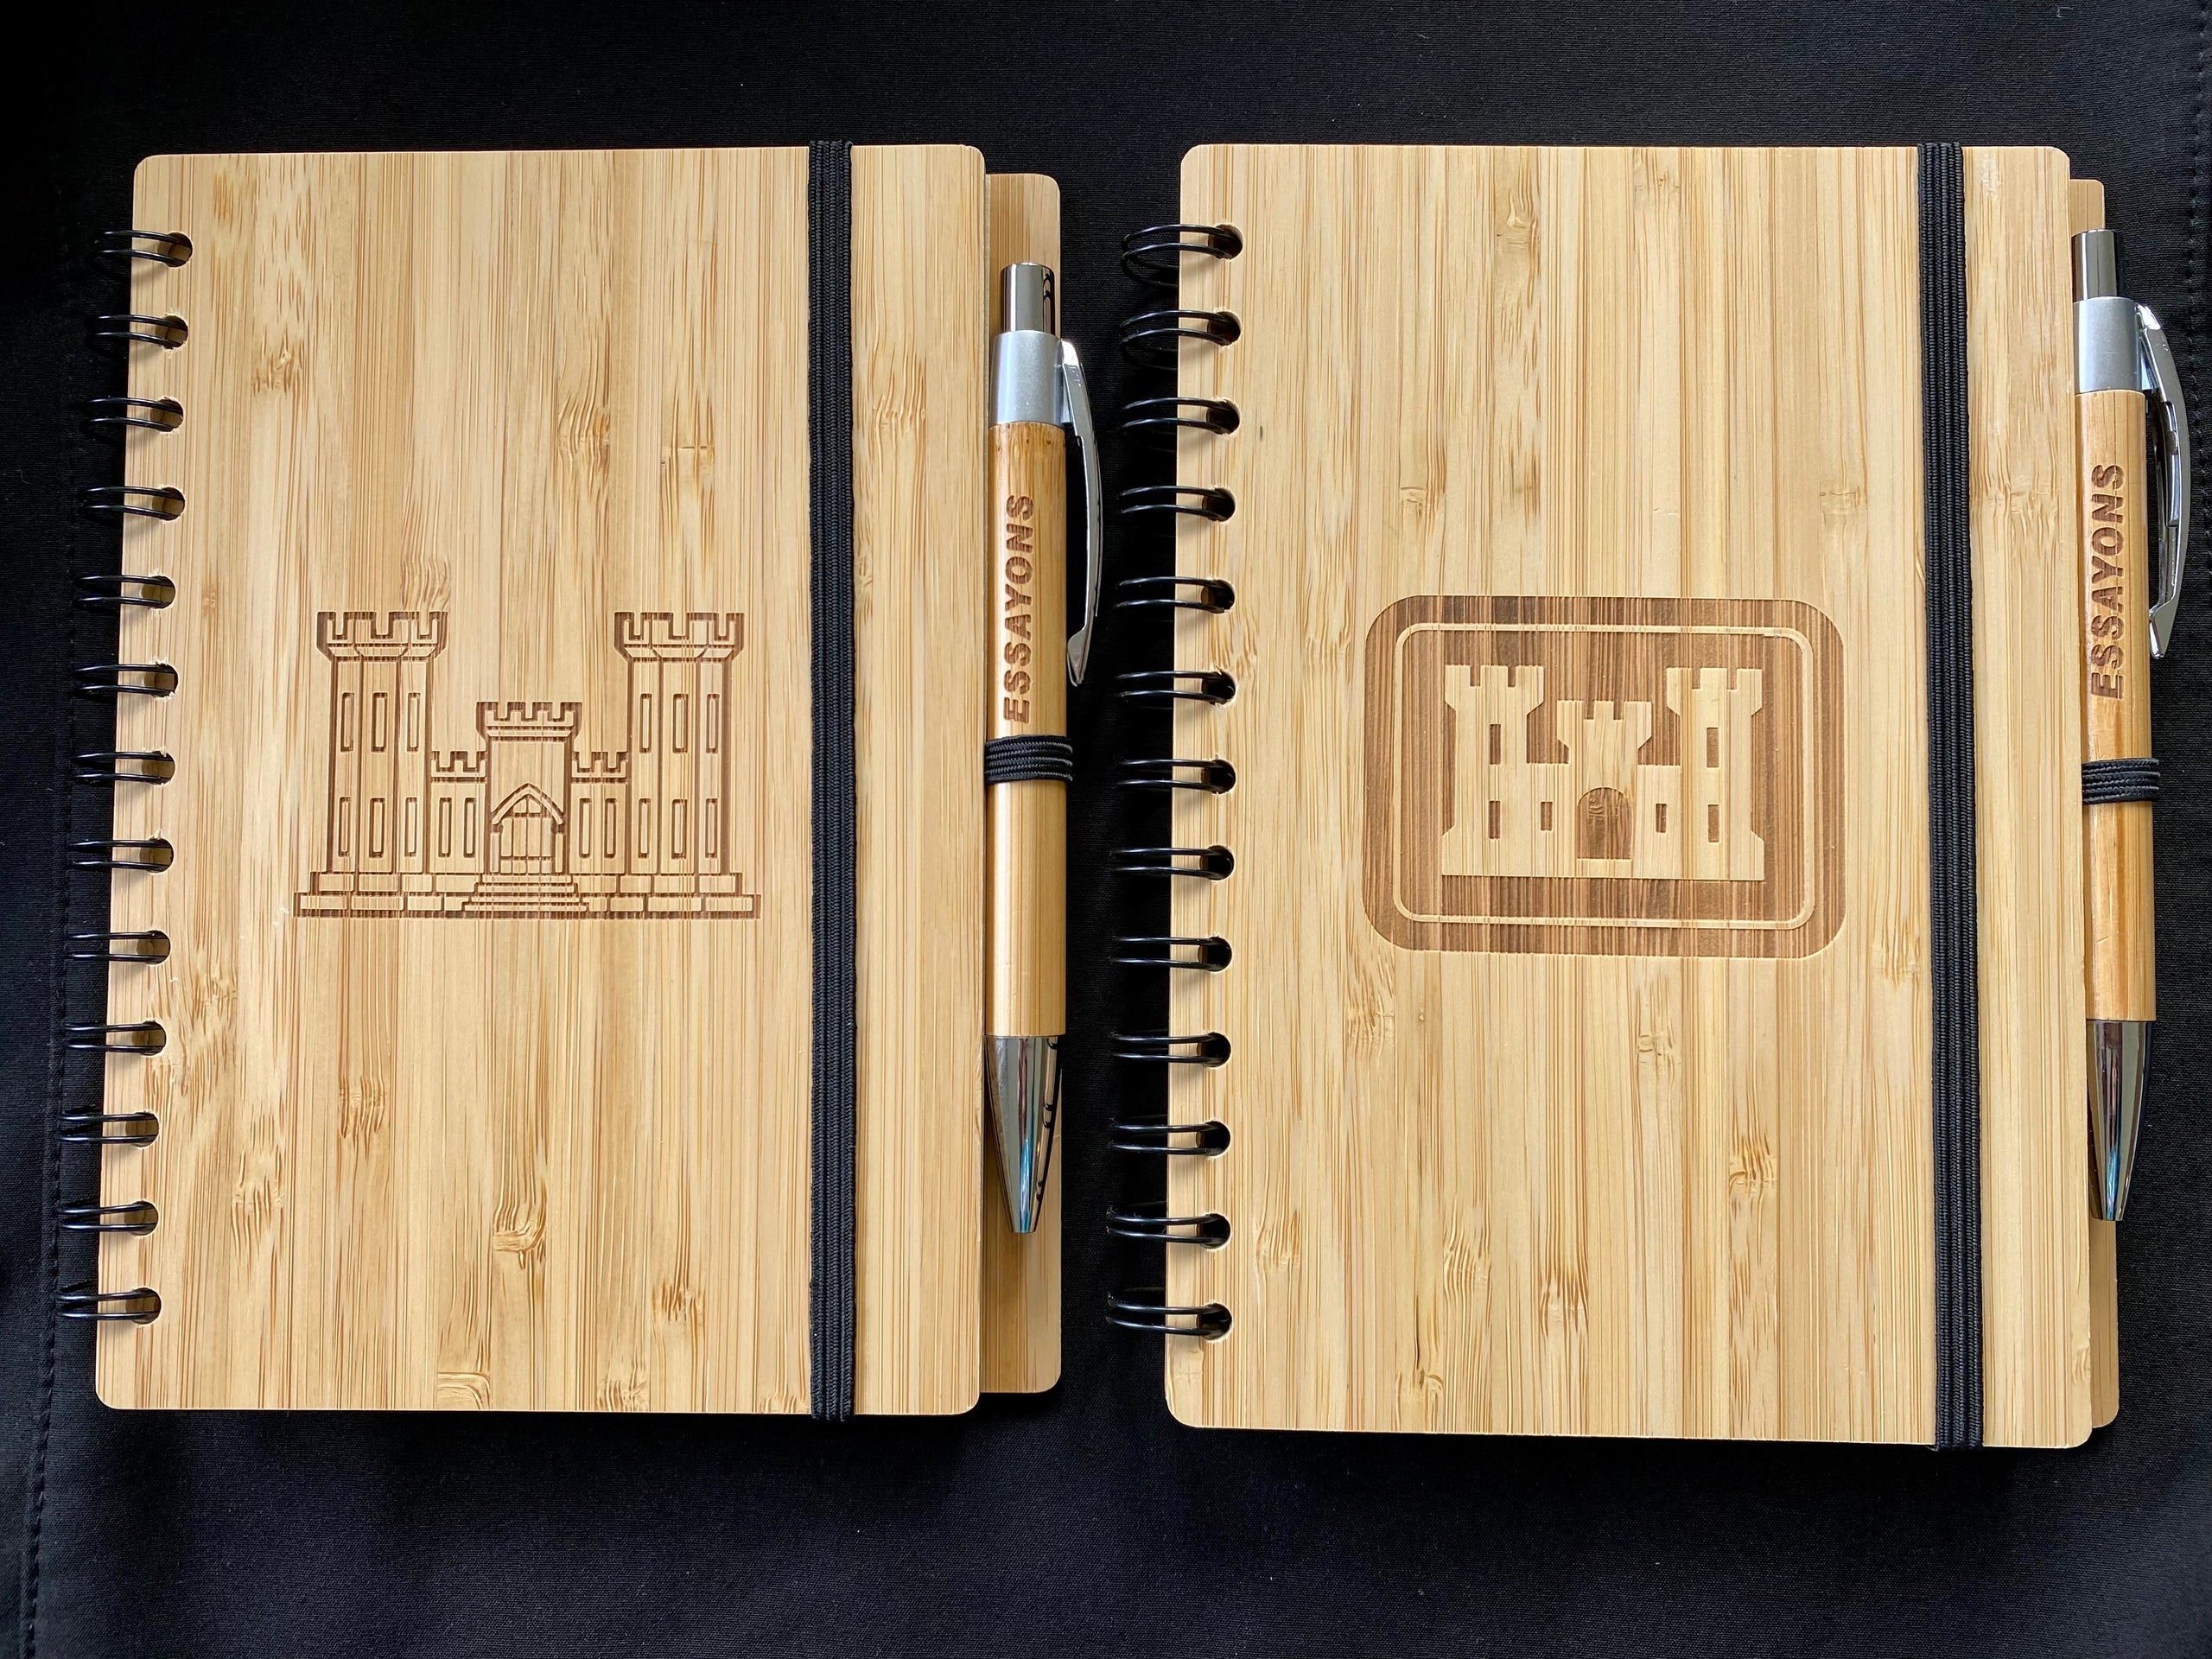 Pen and Notebook Set